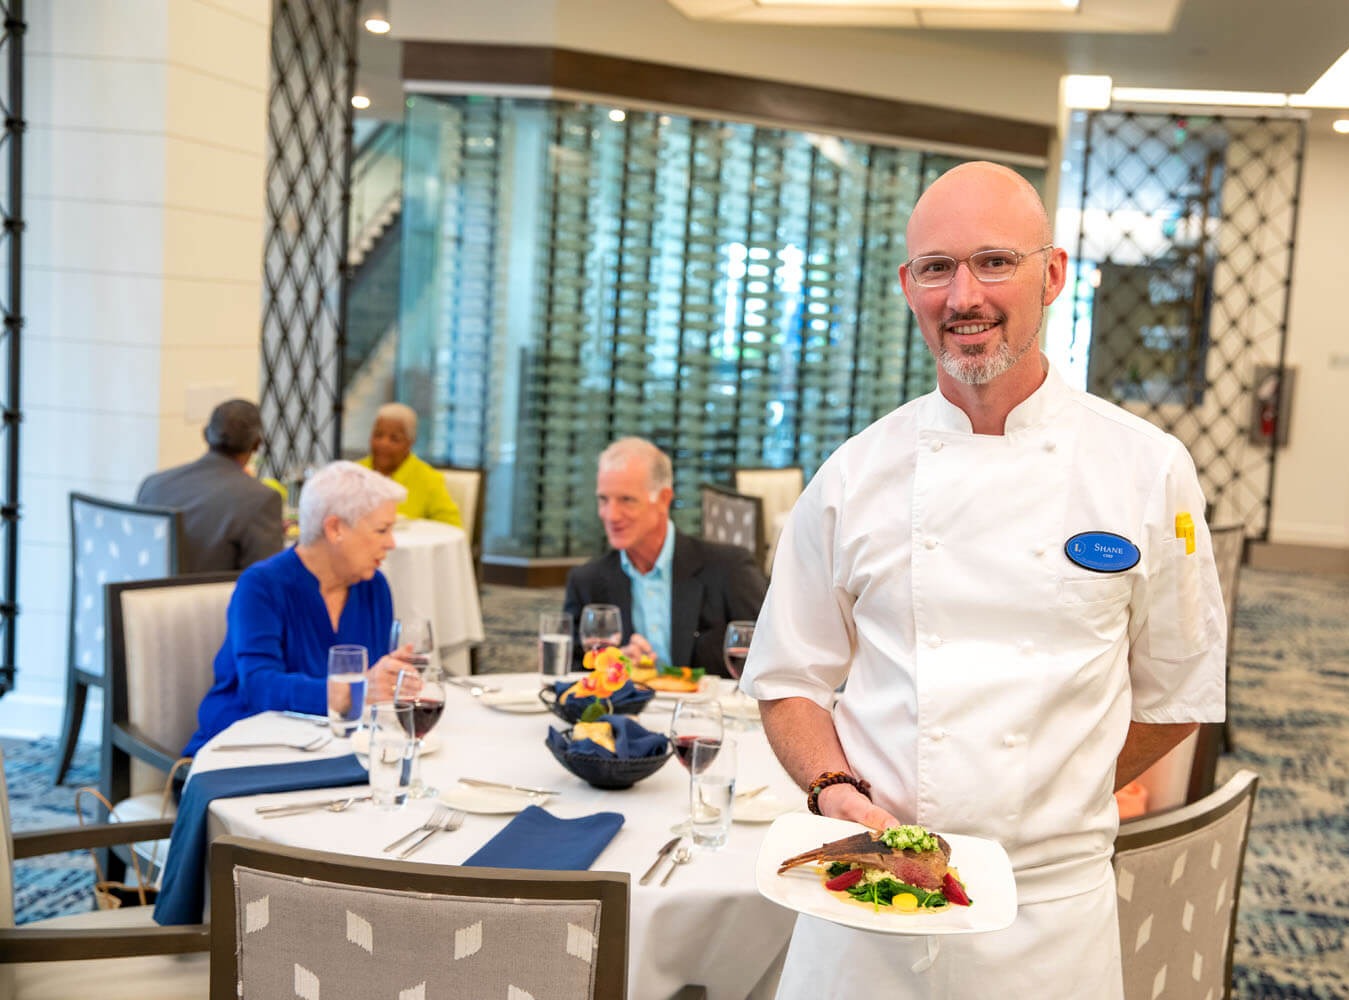 Arbor chef serving meal at indoor restaurant